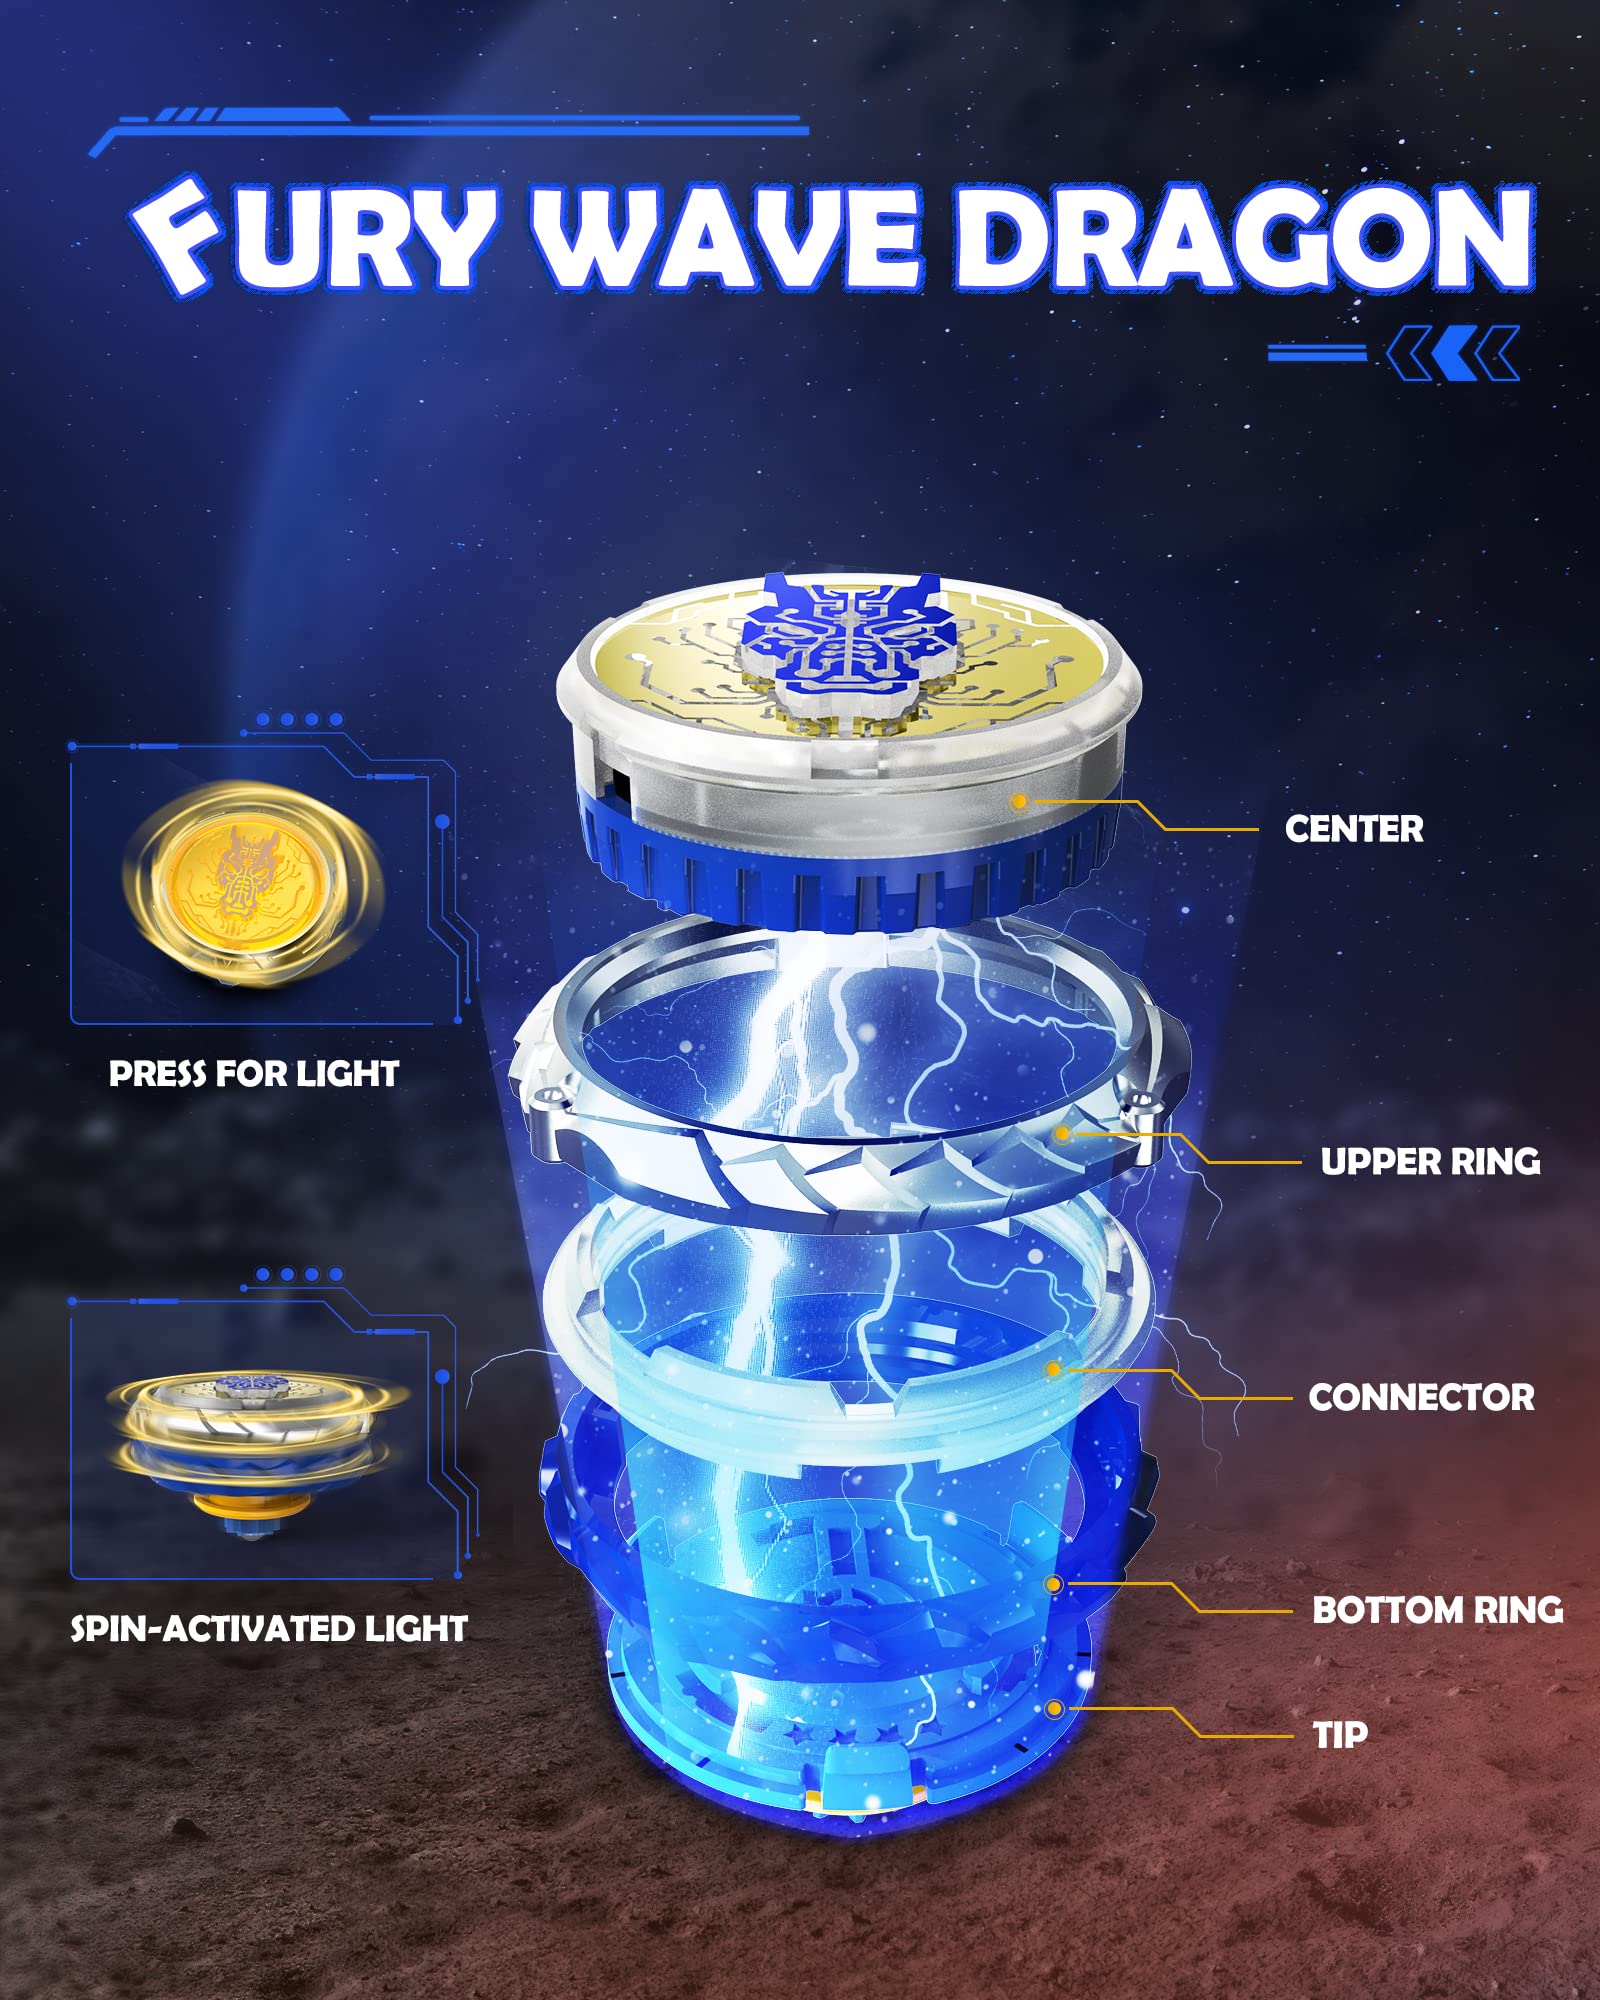 Infinity Nado Stadium - Battling Tops Burst Toy for Boys Grils Age 8-12 - Including Gaming Top Toys, Sword Launcher - Fury Wave Dragon, Sapphire Blue